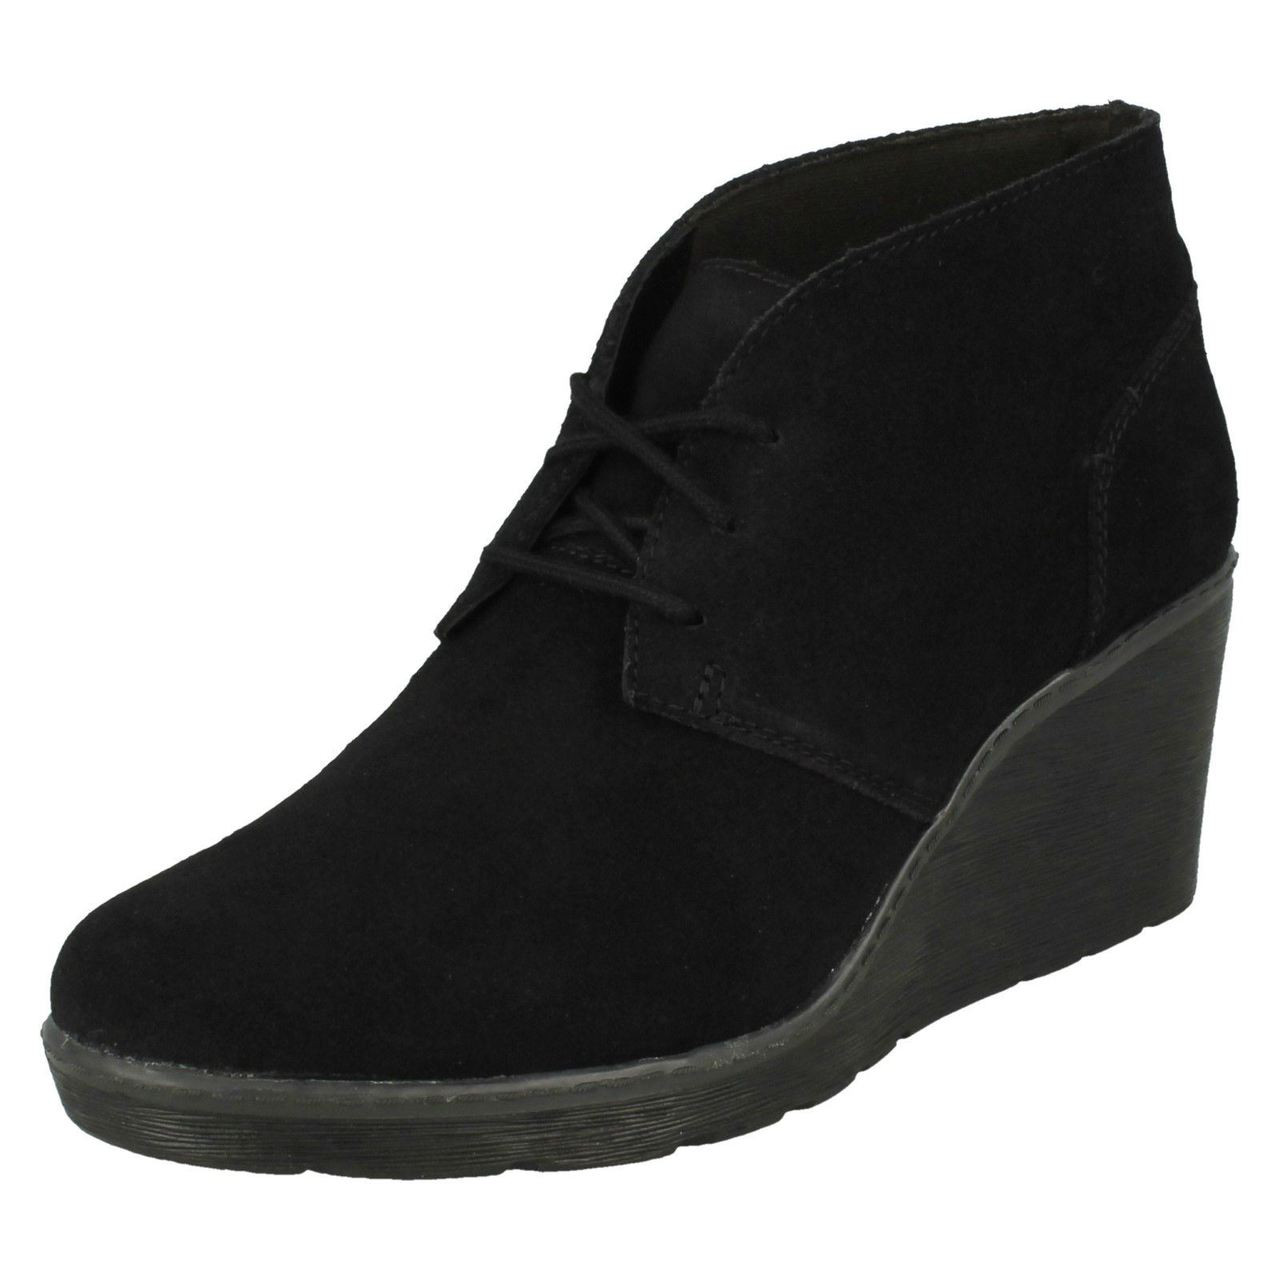 clarks wedge ankle boots 